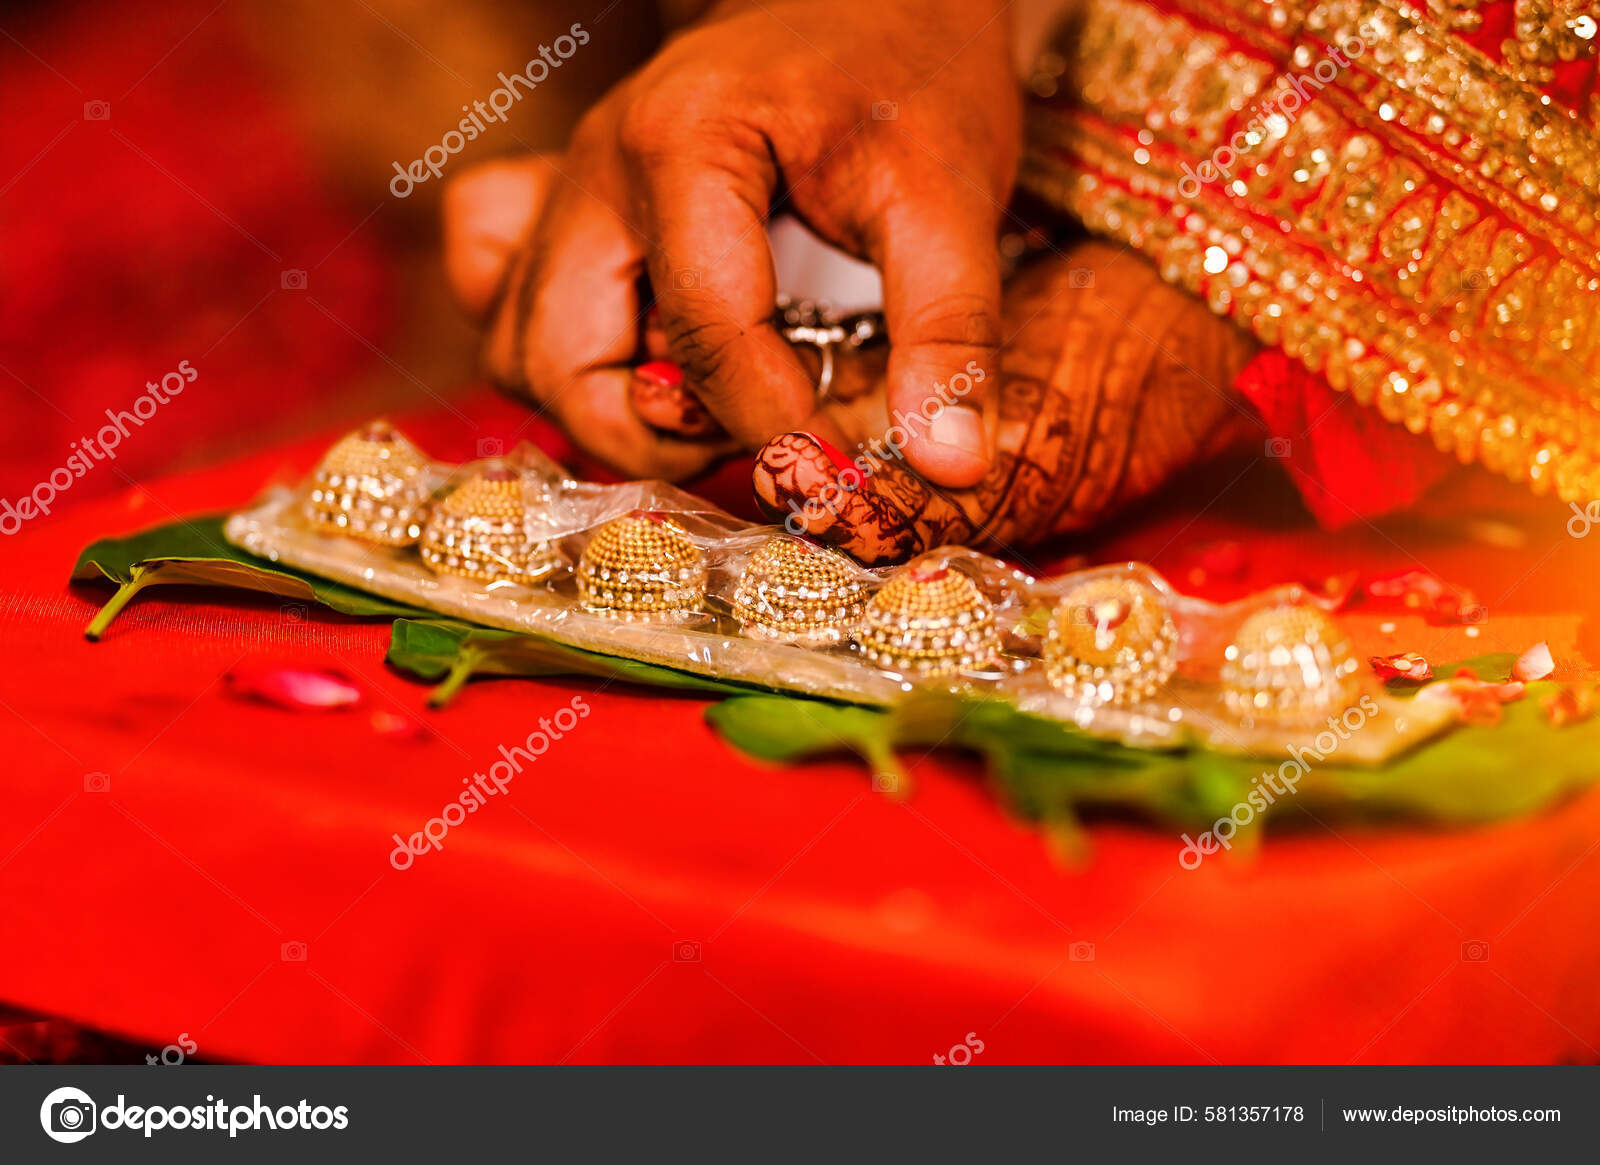 Engagement Ring Indian Engagement Stock Photo, Picture and Royalty Free  Image. Image 152790505.